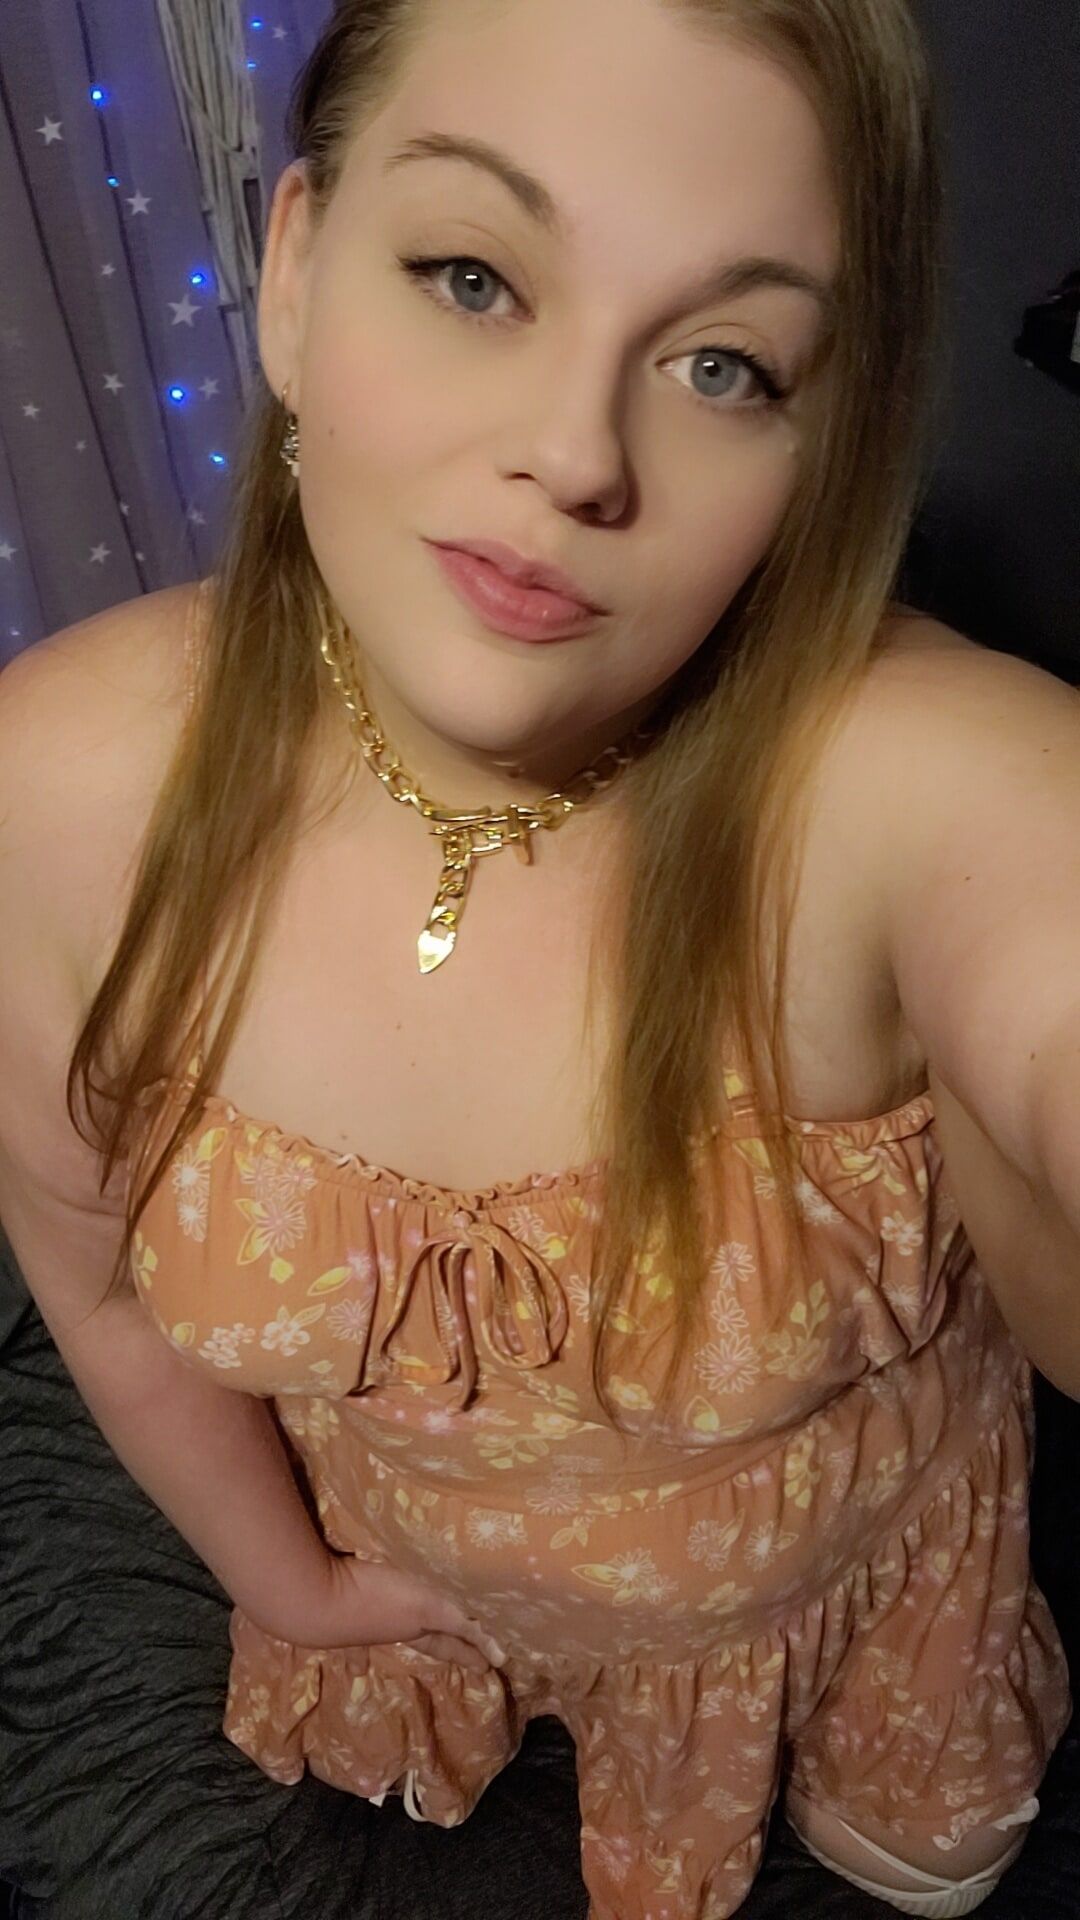 Cute bbw in dress and white fishnet knee highs